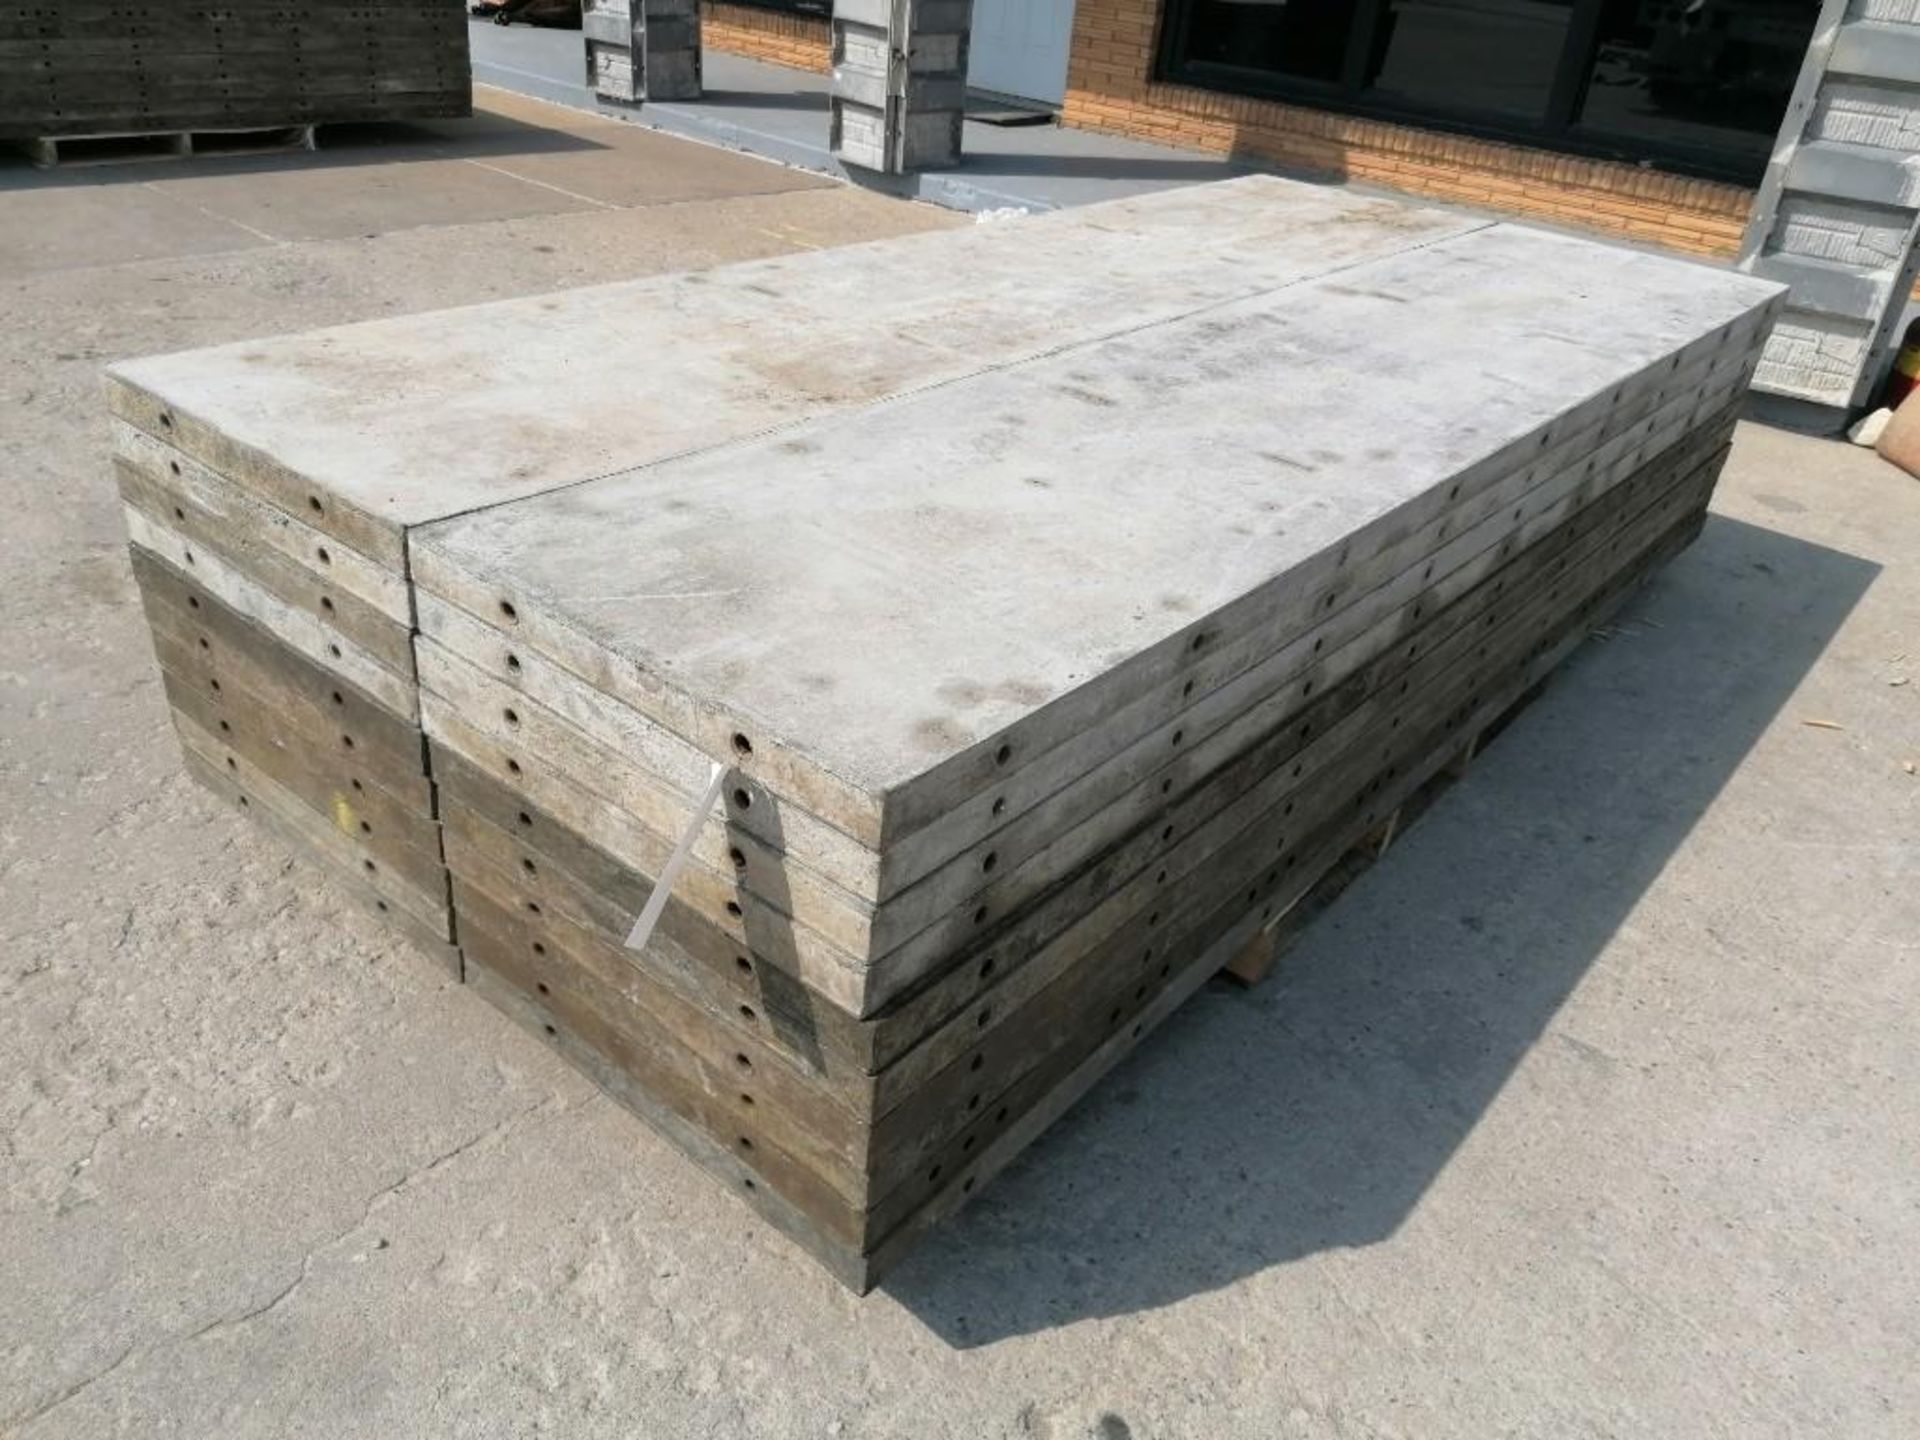 (20) 2' x 9' Laydowns Wall-Ties Smooth Aluminum Concrete Forms 6-12 Hole Pattern. Located in Mt.